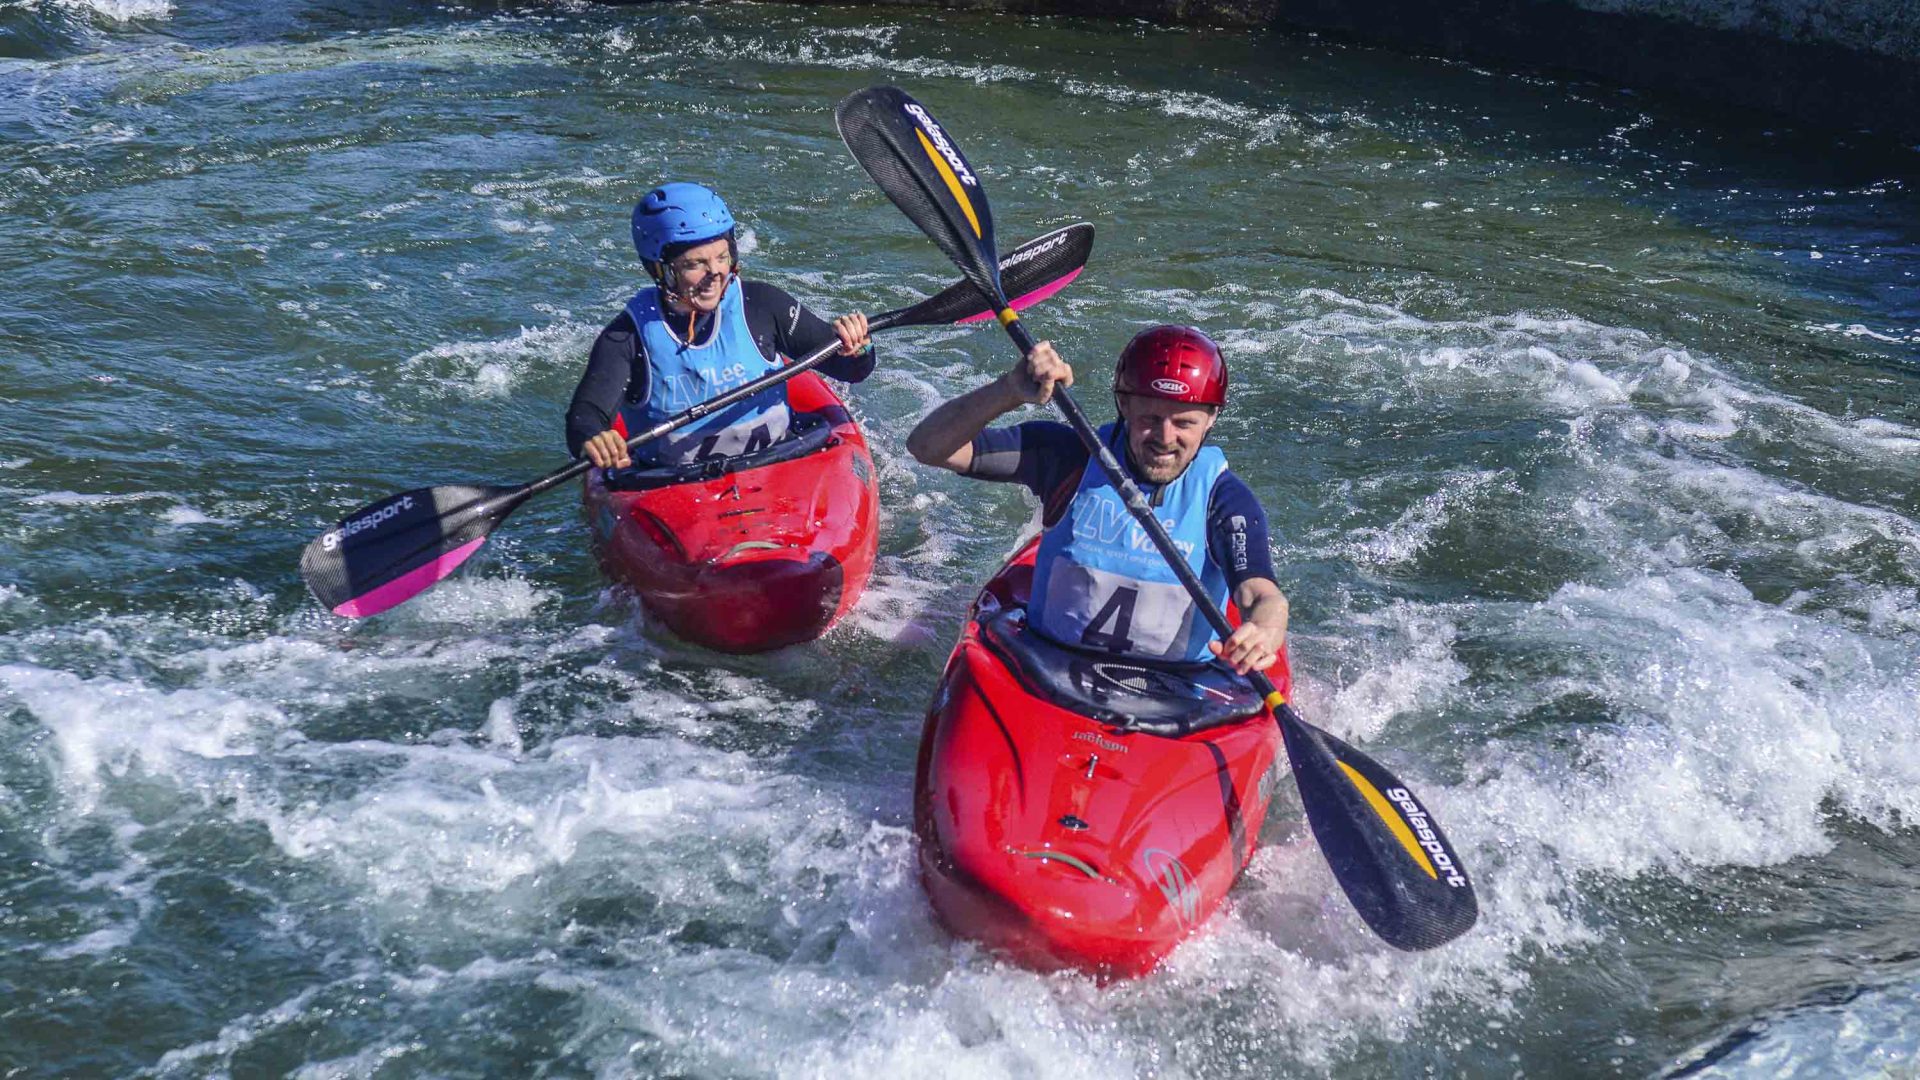 Two people smile and laugh as they kayak through the water.